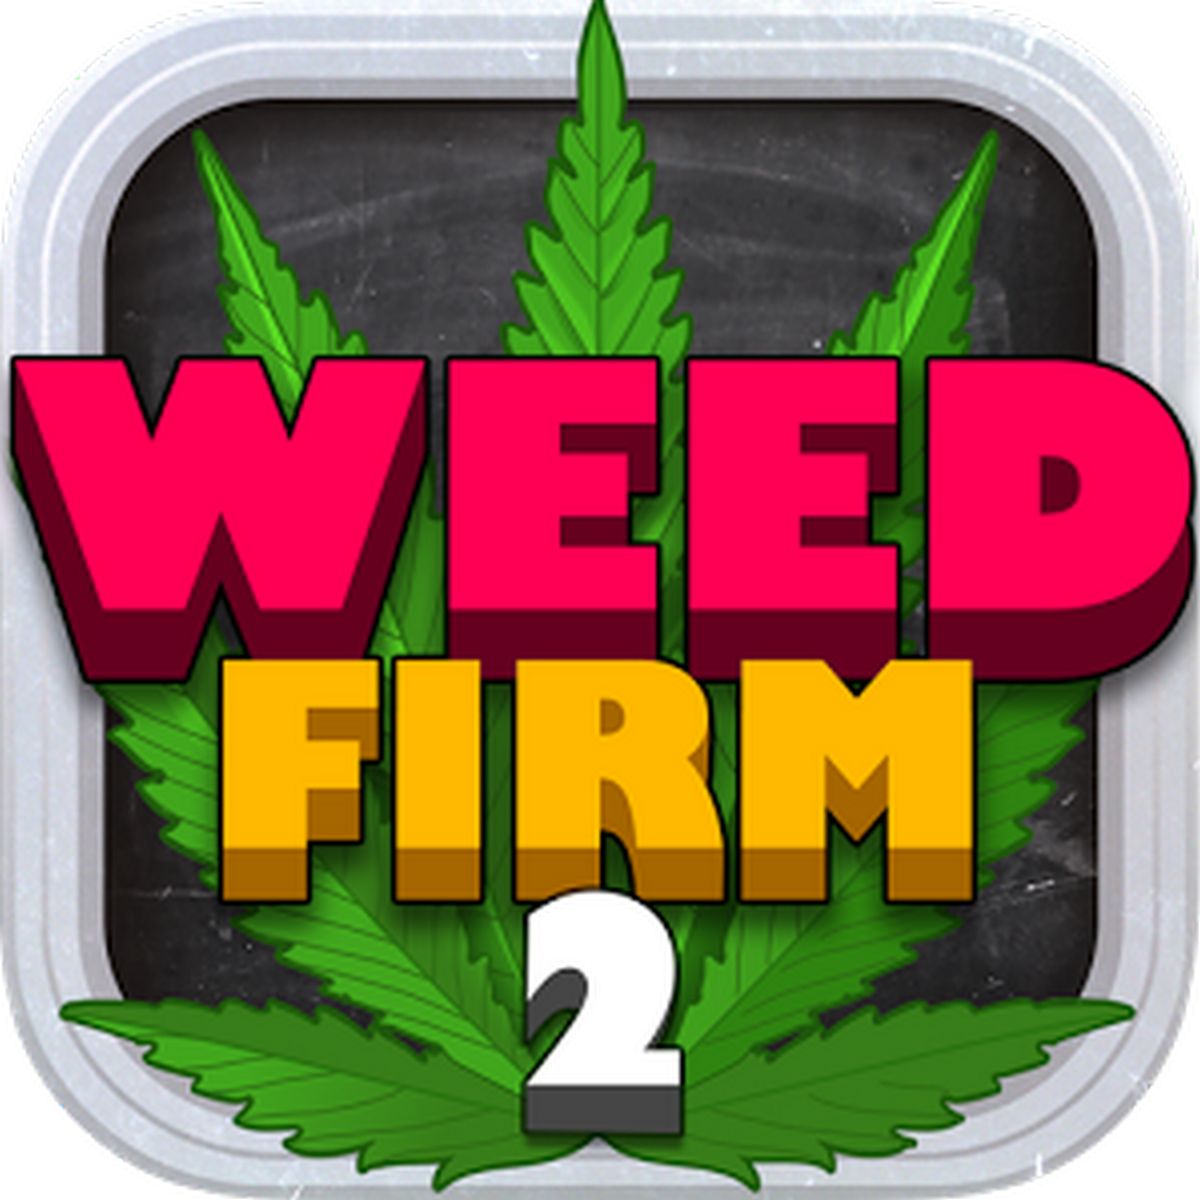 Weed Firm 2 Back to College APK MOD v3.0.34 (Dinero infinito